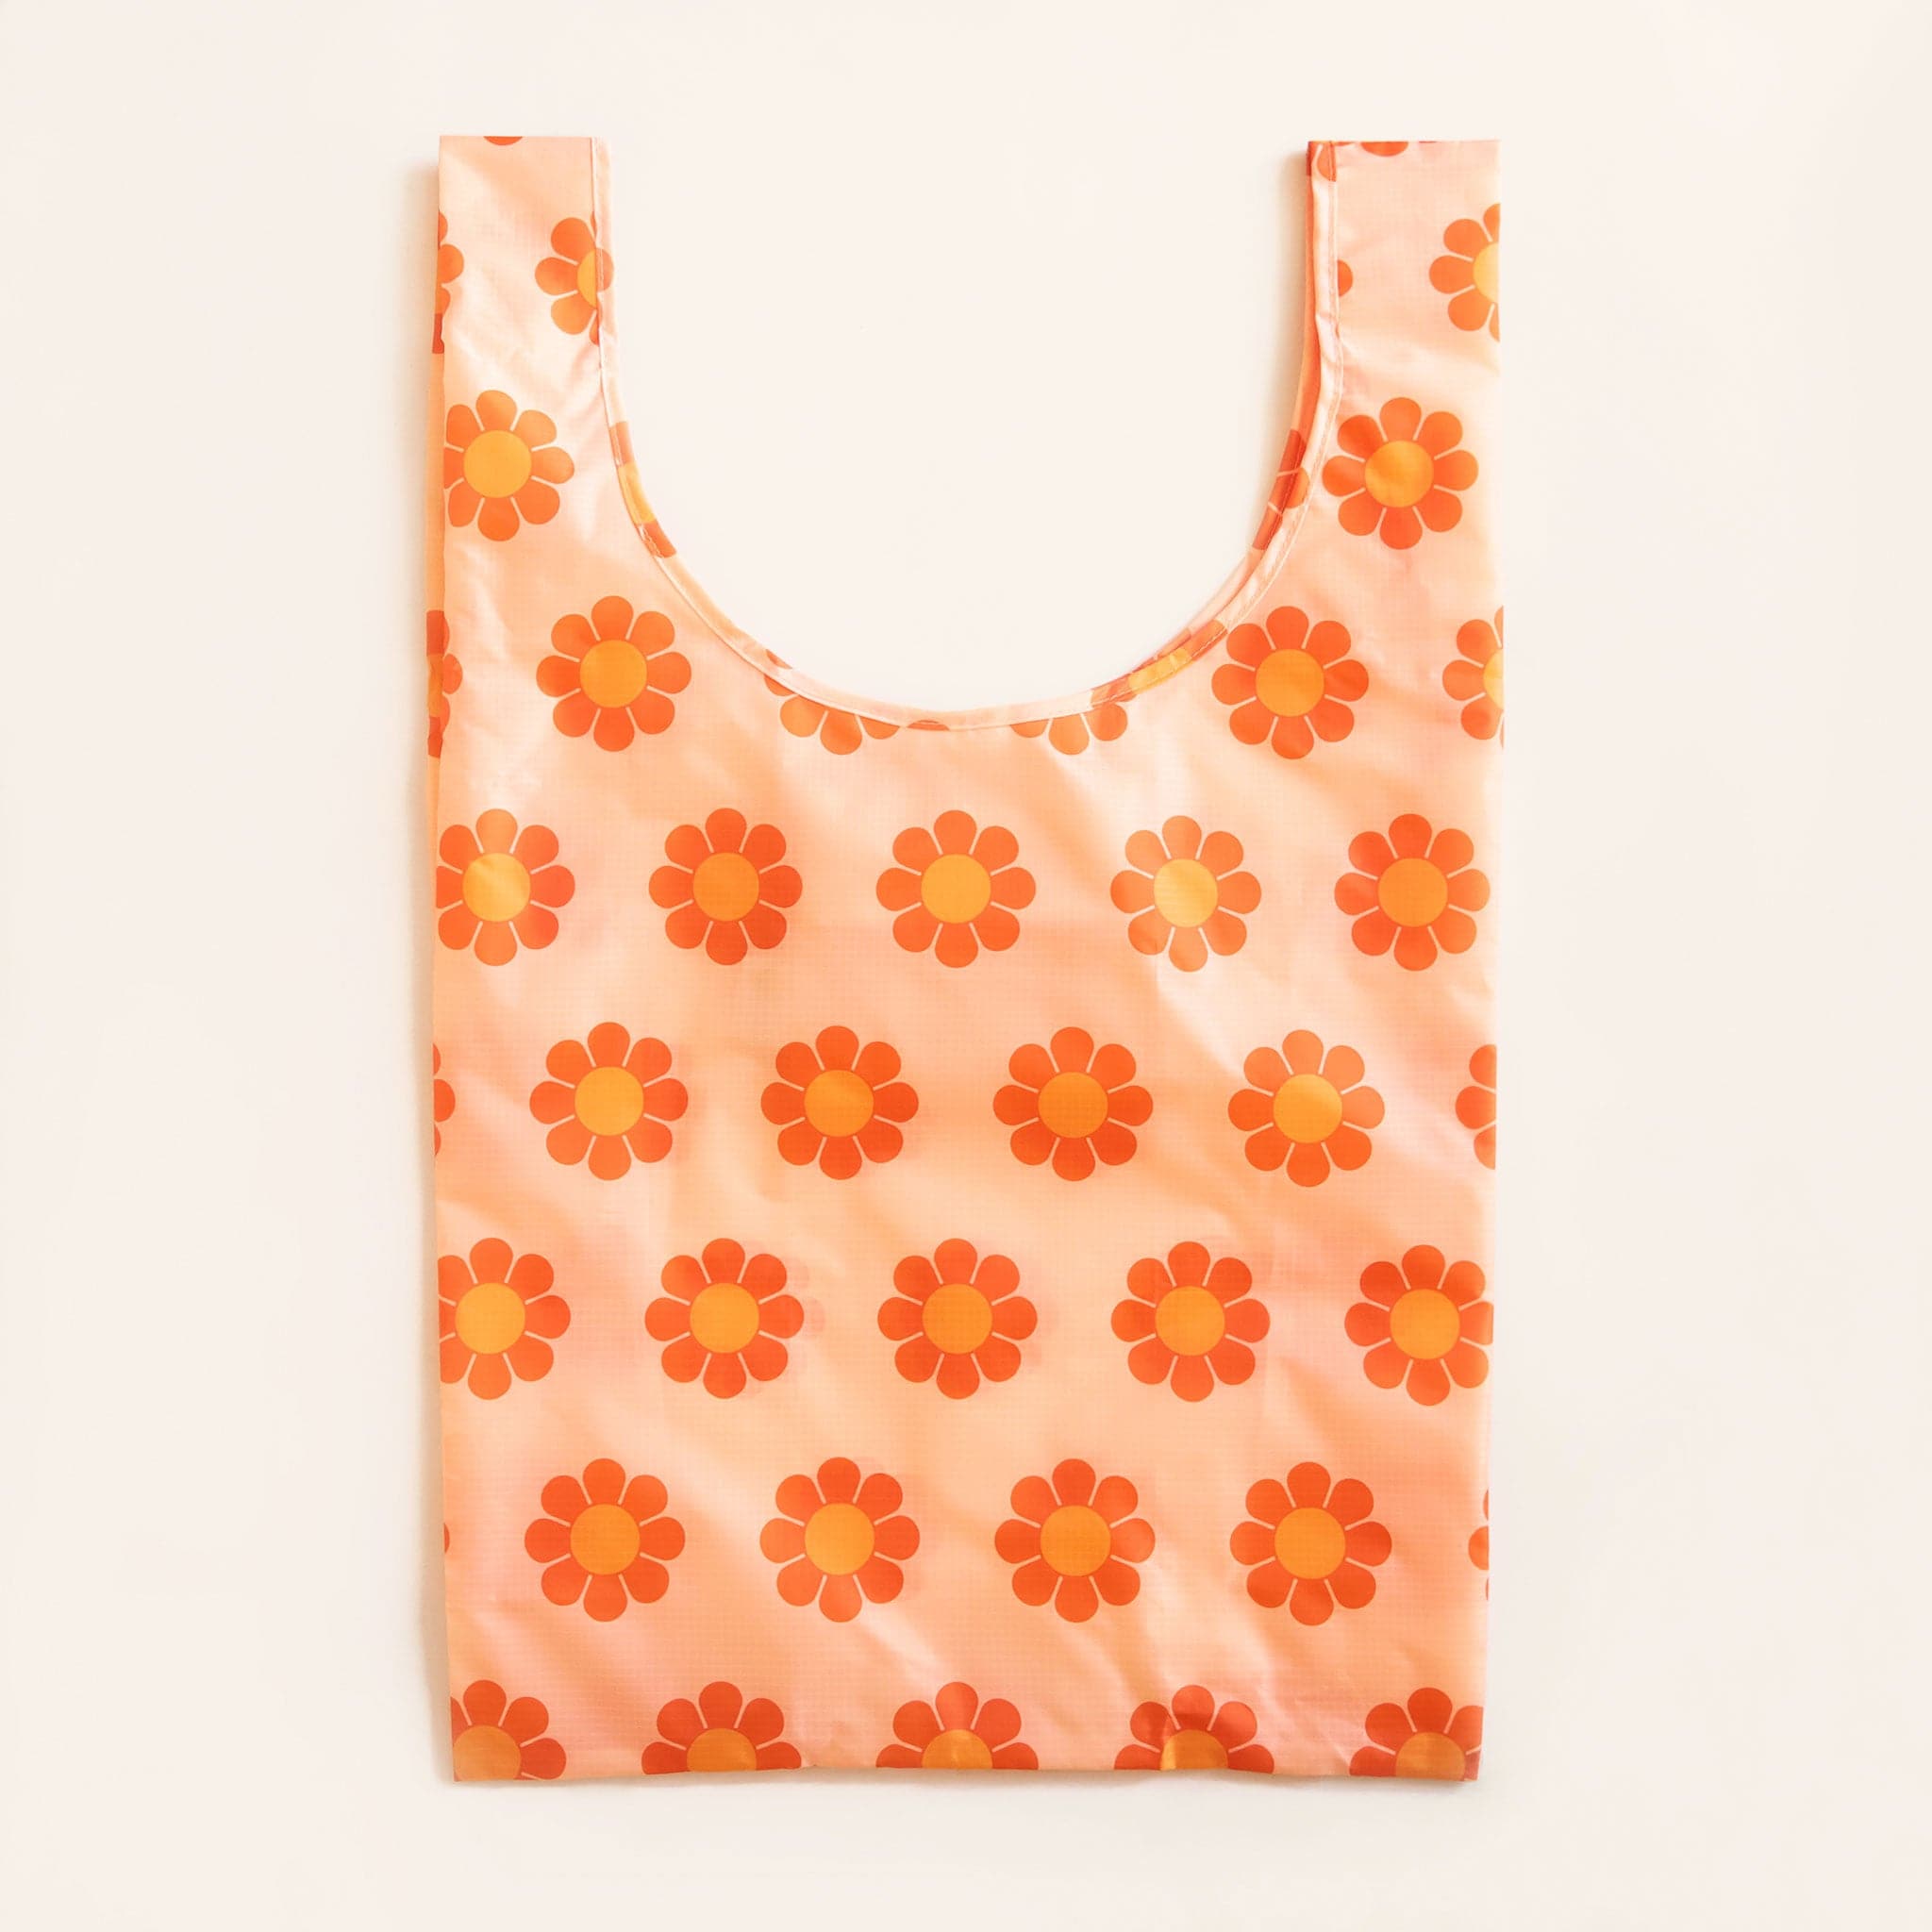 Peach reusable bag filled with a pattern of flowers with red-orange petals and tangerine centers. The bag is positioned flat on a table and has a 'U' shape between two handles.